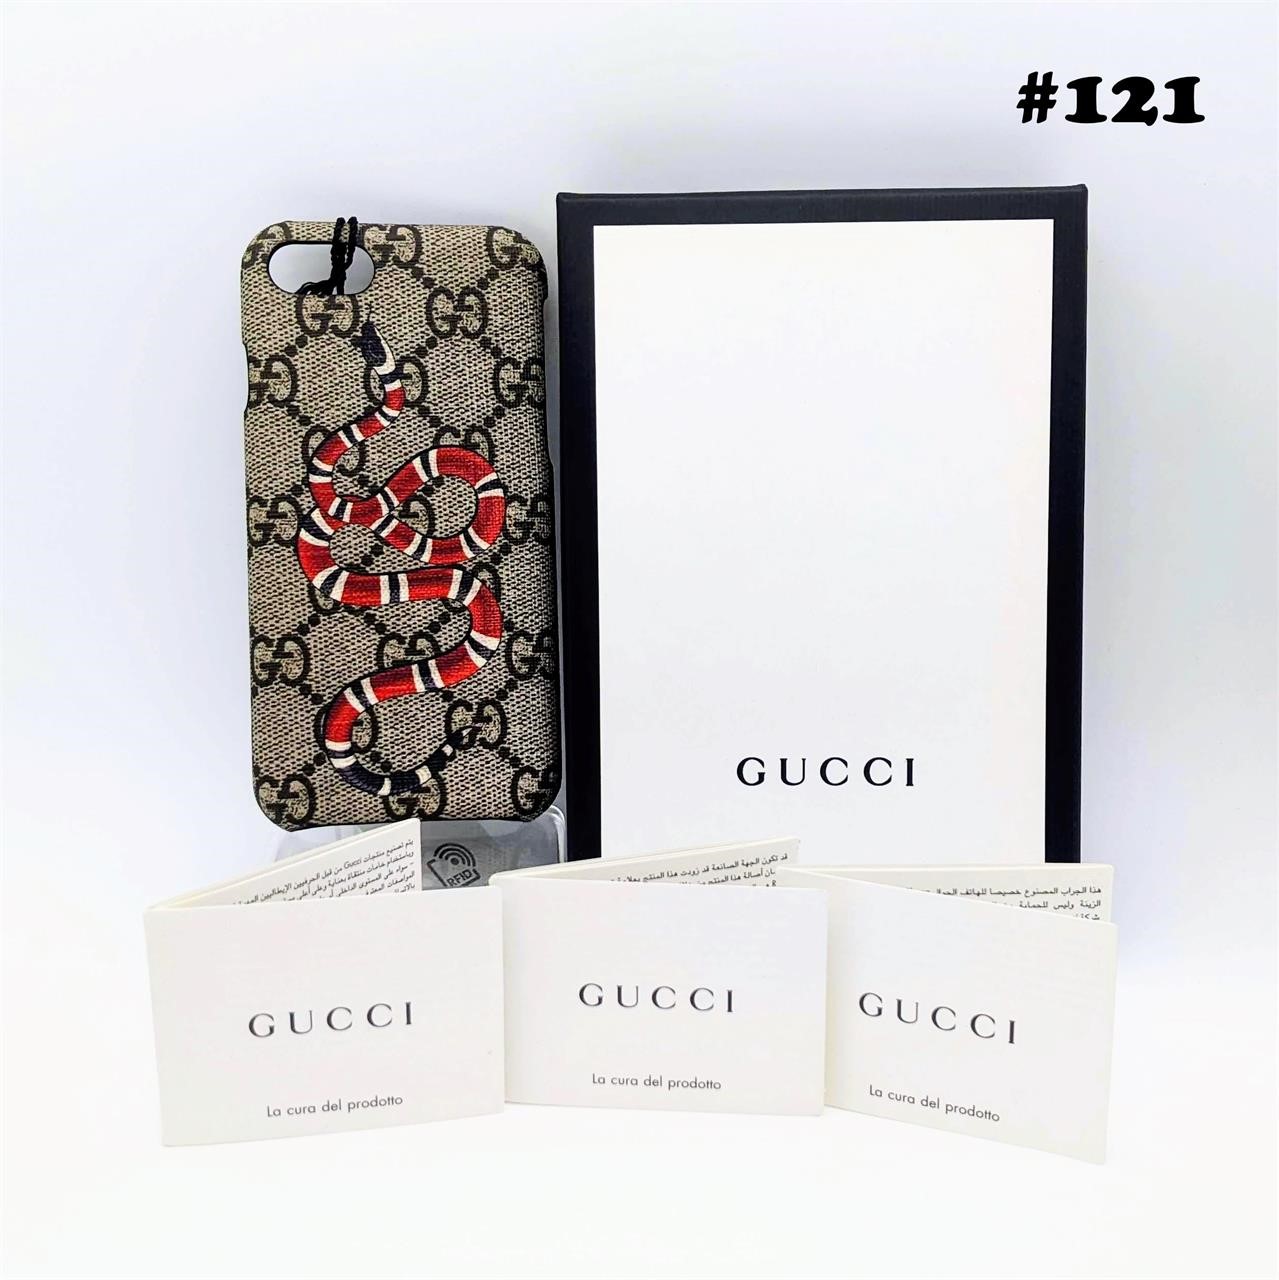 Gucci Iphone Case Looks New